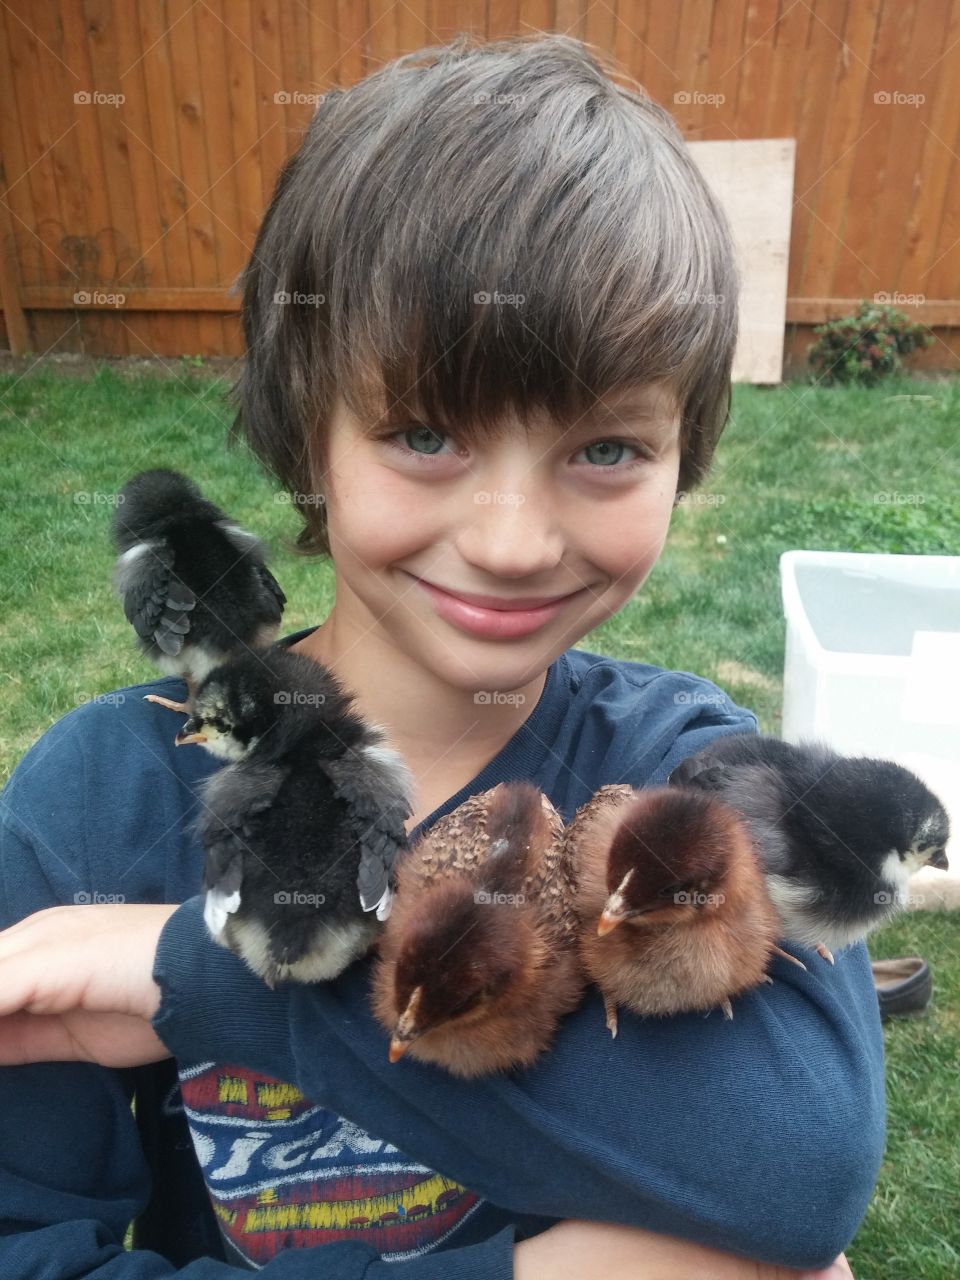 baby chickens